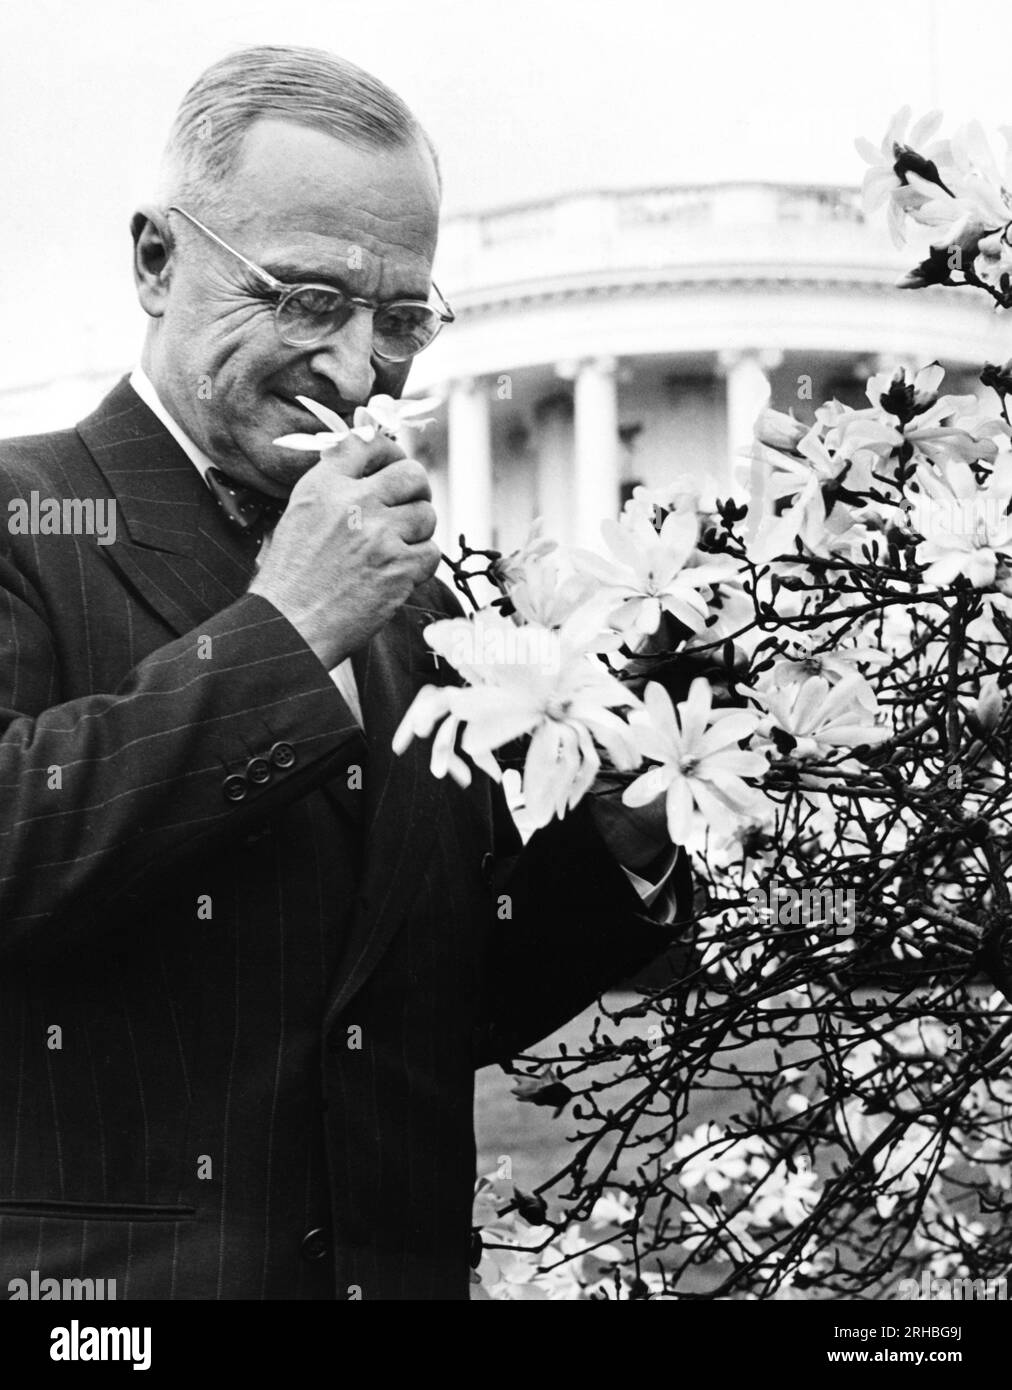 Washington, D.C.:  May 17, 1946 President Truman puases to smell the blooming flowers on a magnolia tree on the White House grounds. Stock Photo